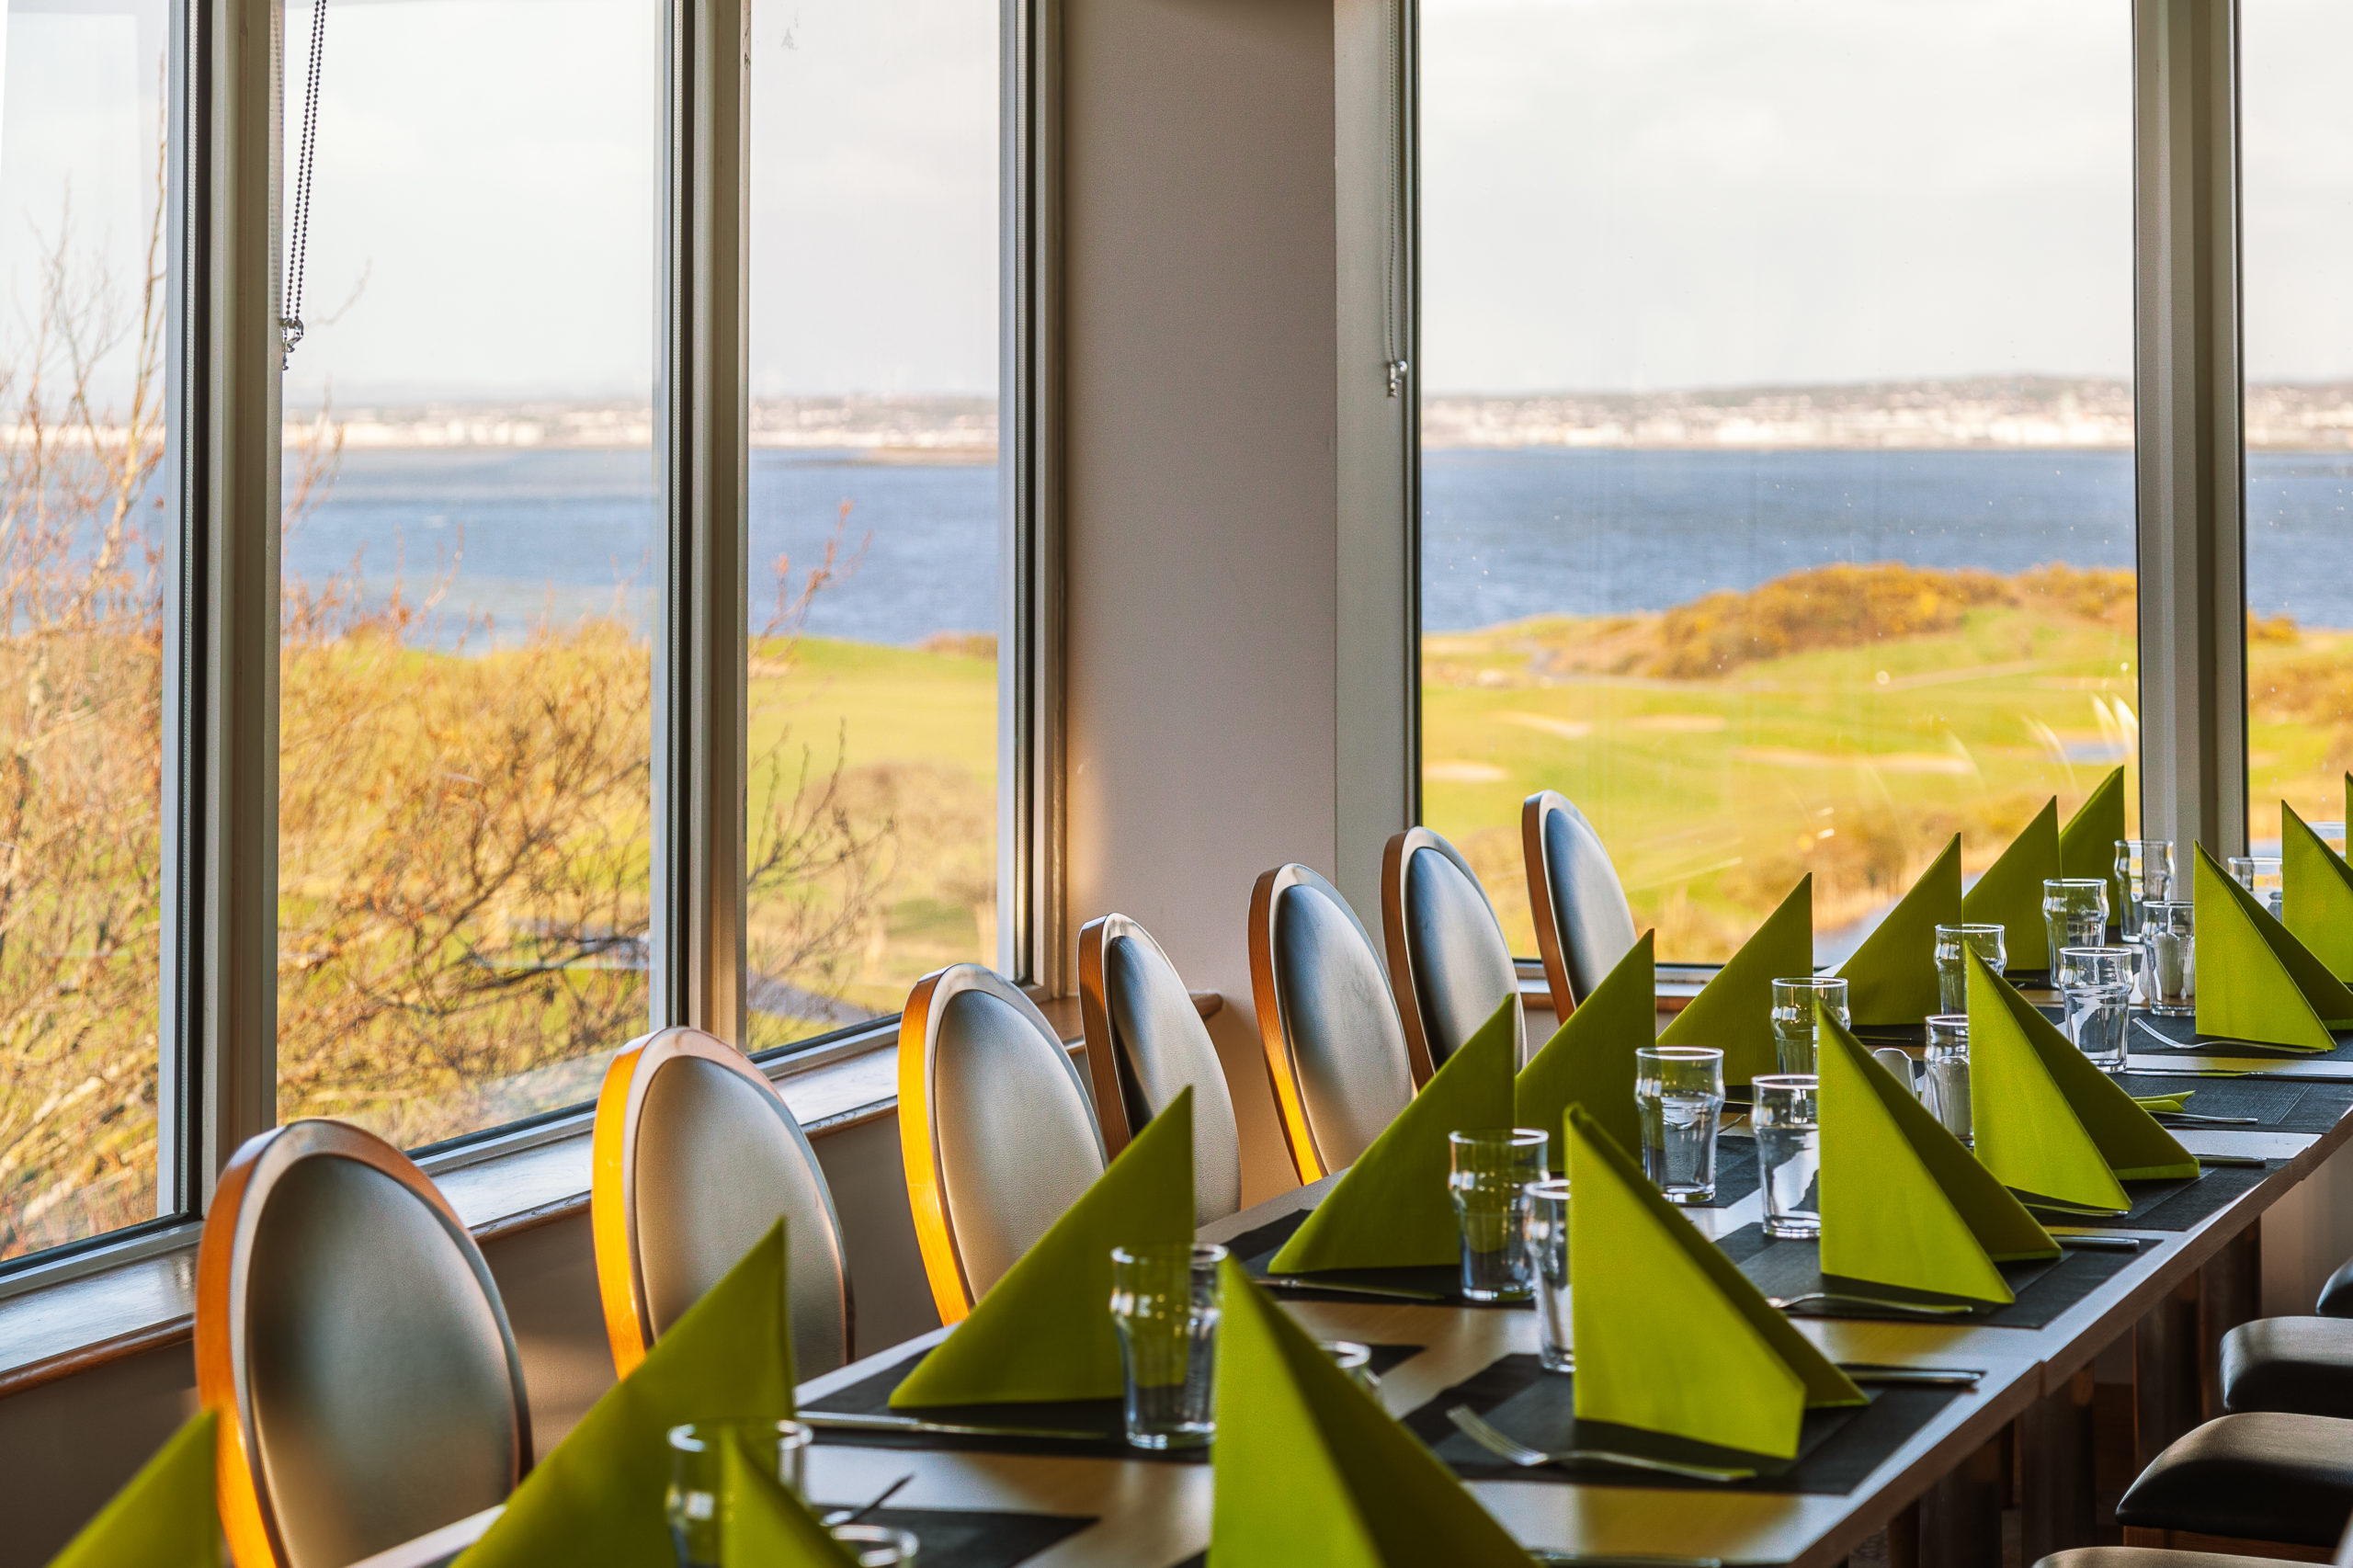 special occasion tables and chairs lined up for formal event with Galway Bay Golf Resort as backdrop